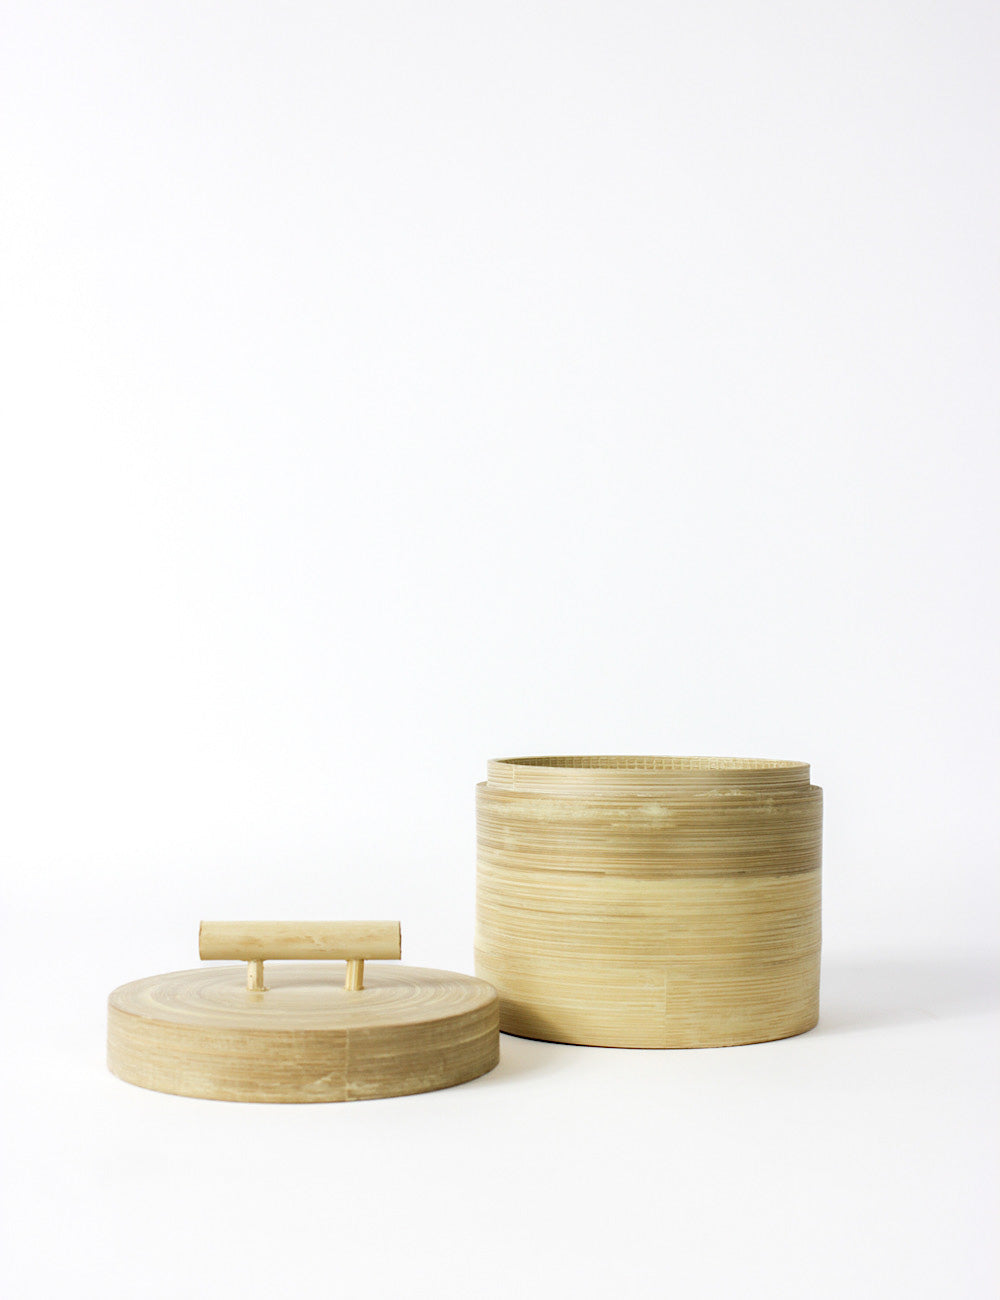 Bamboo canister, a small storage box with a cylindrical shape and fitted lid, with a t-bar handle. Picture shows the lid off. 